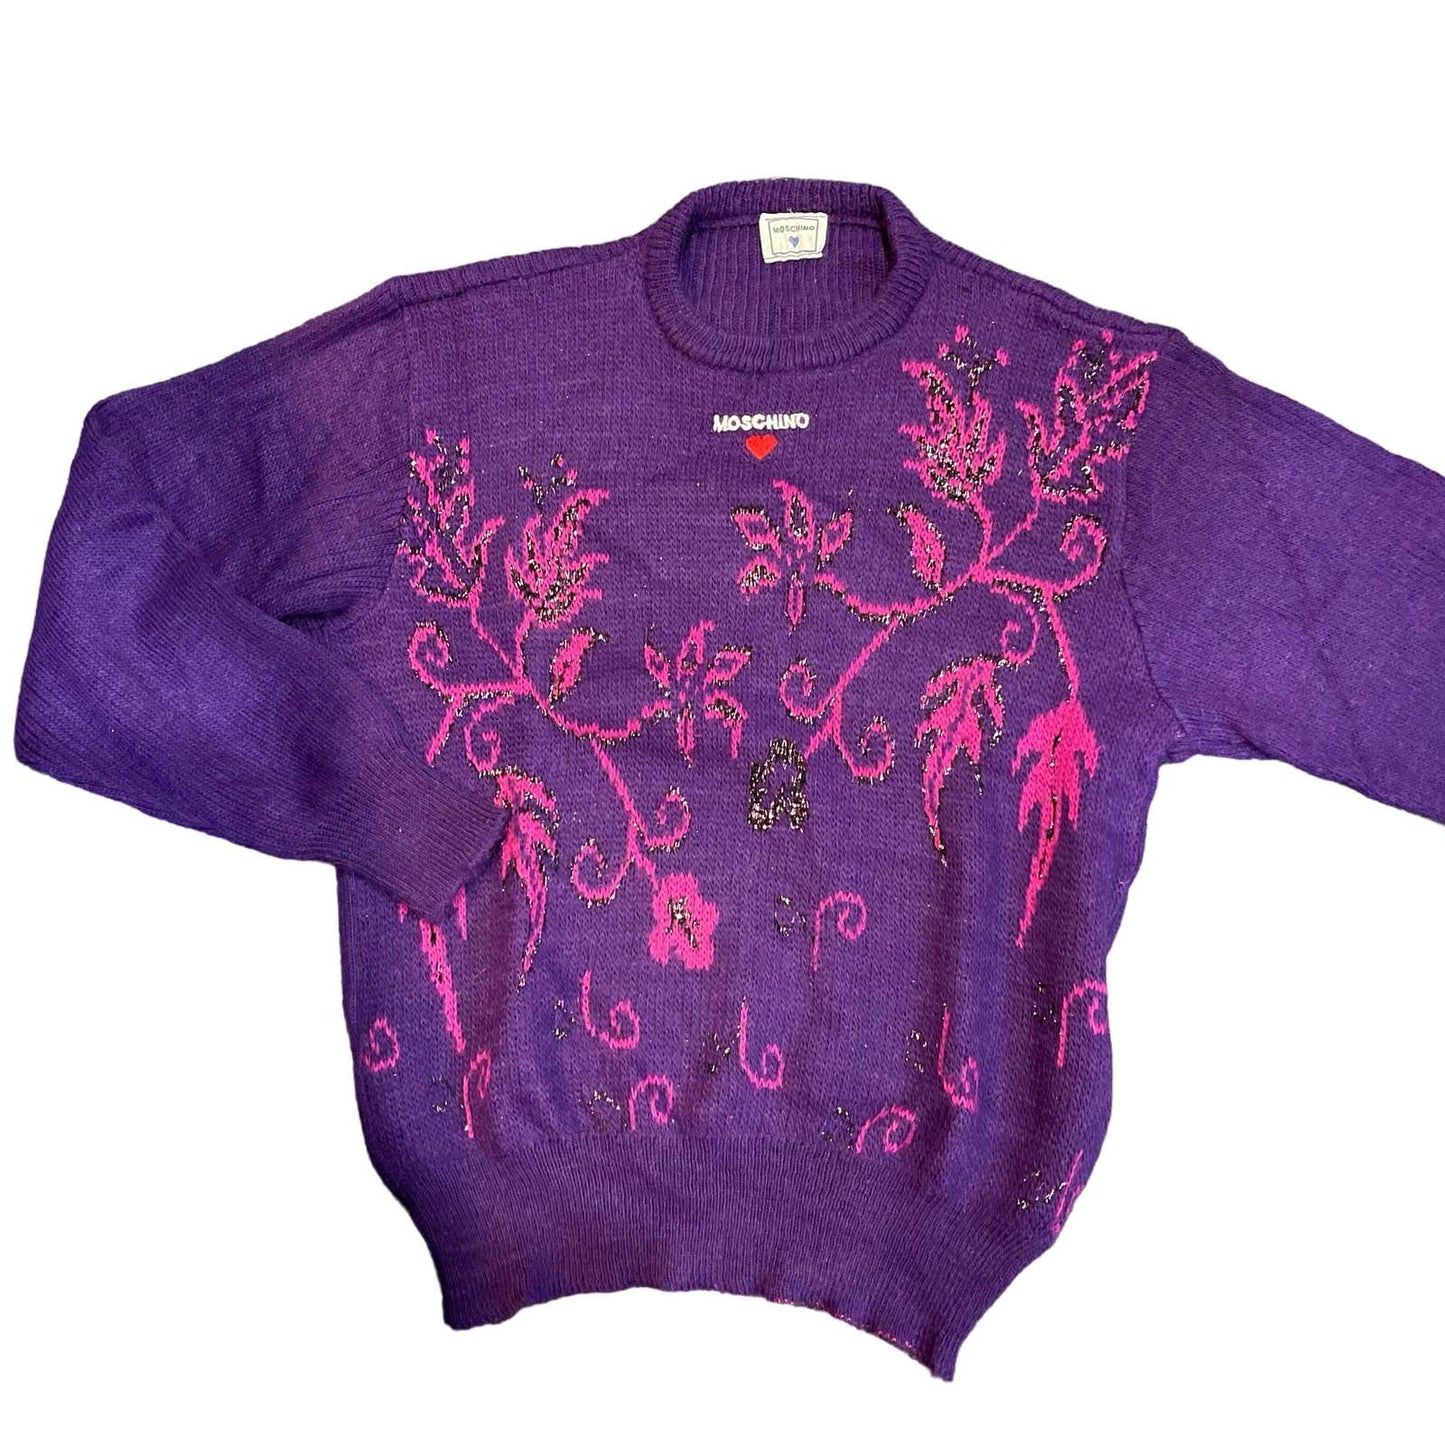 Vintage 80s Moschino Knit Sweater  (XS-L)